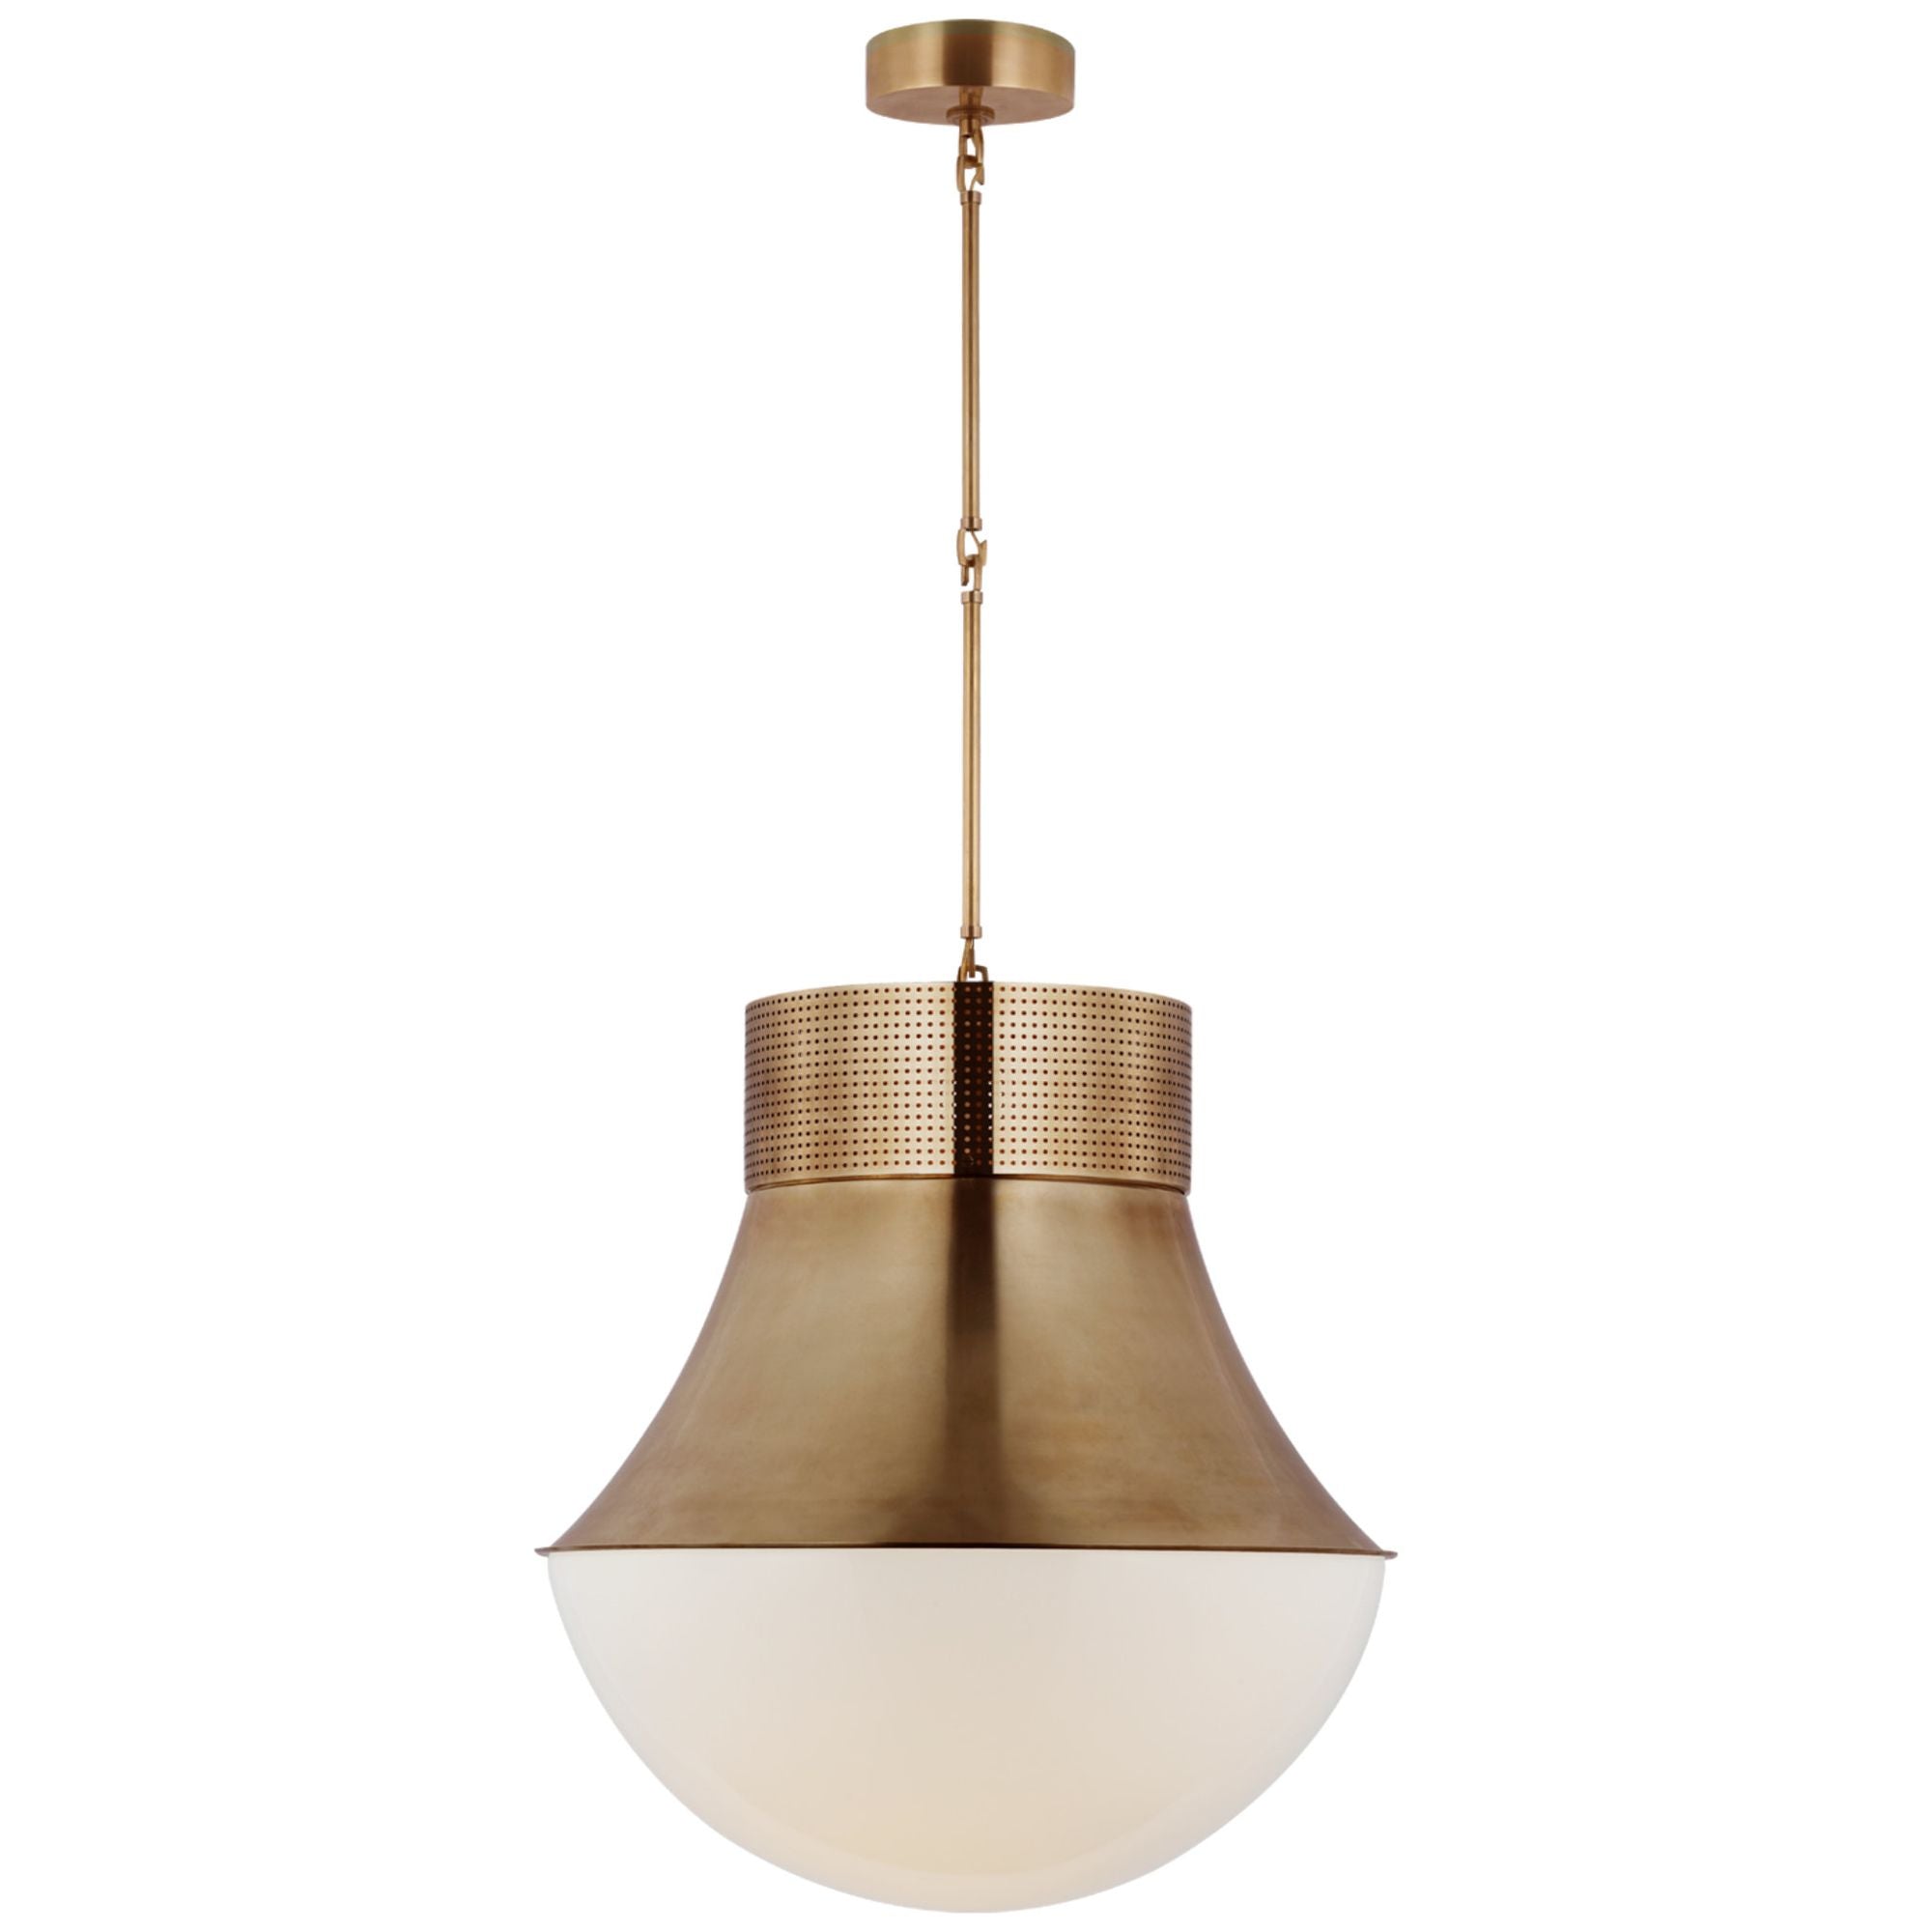 Kelly Wearstler Precision 24" Pendant in Antique-Burnished Brass with White Glass